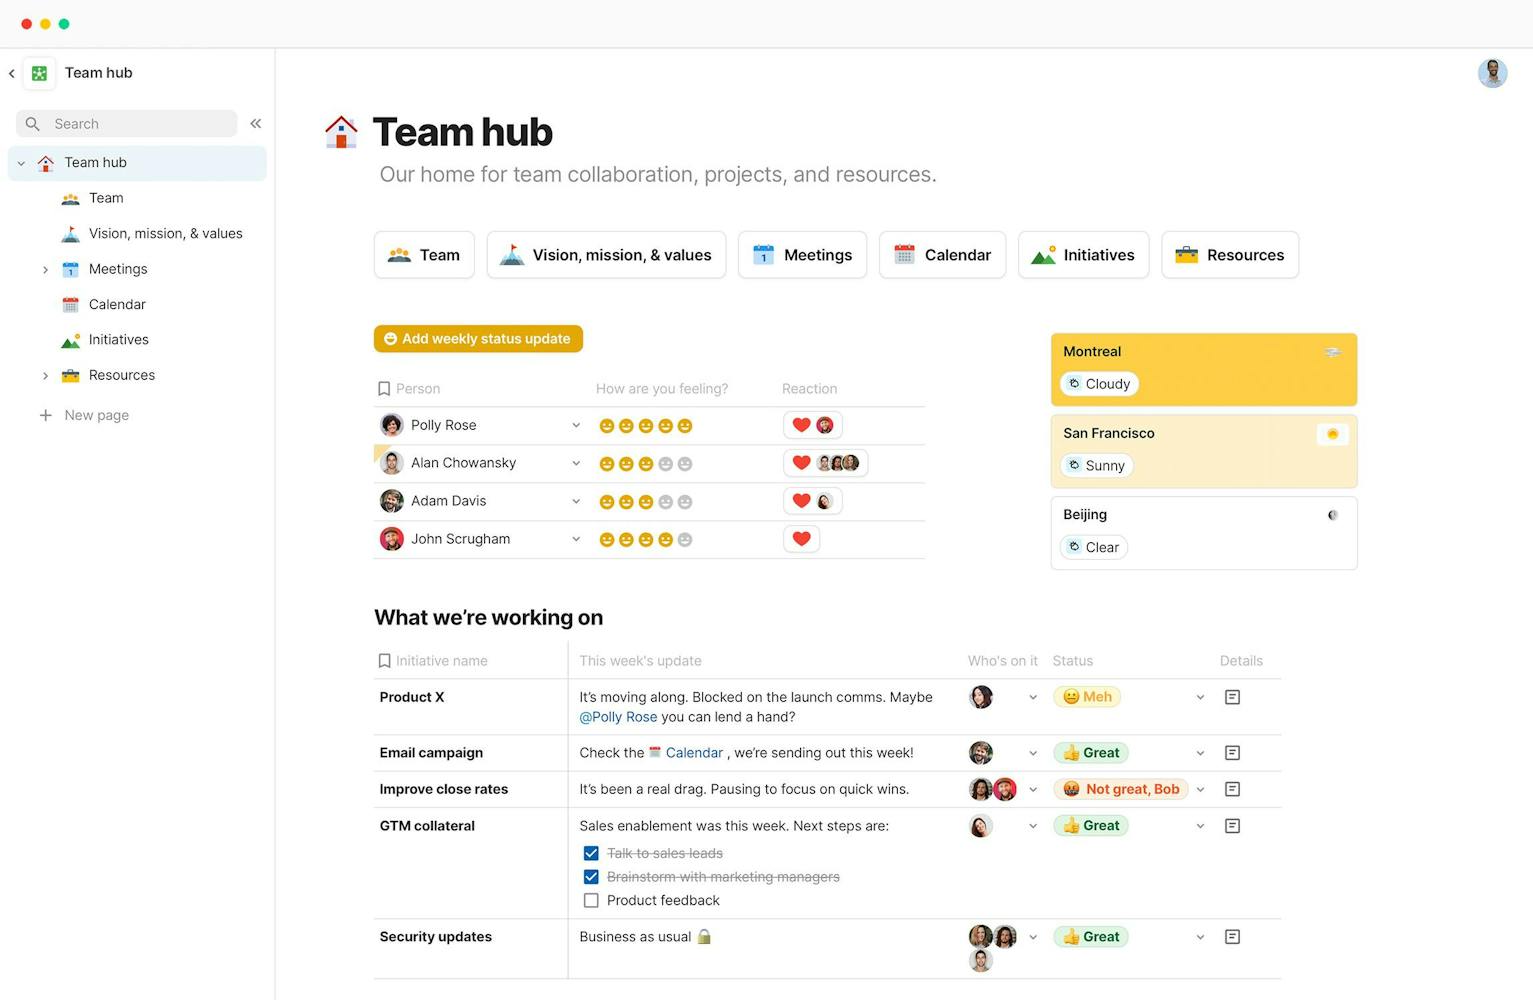 A Team Hub in Coda - includes a list of teammates and details for projects the team is working on.